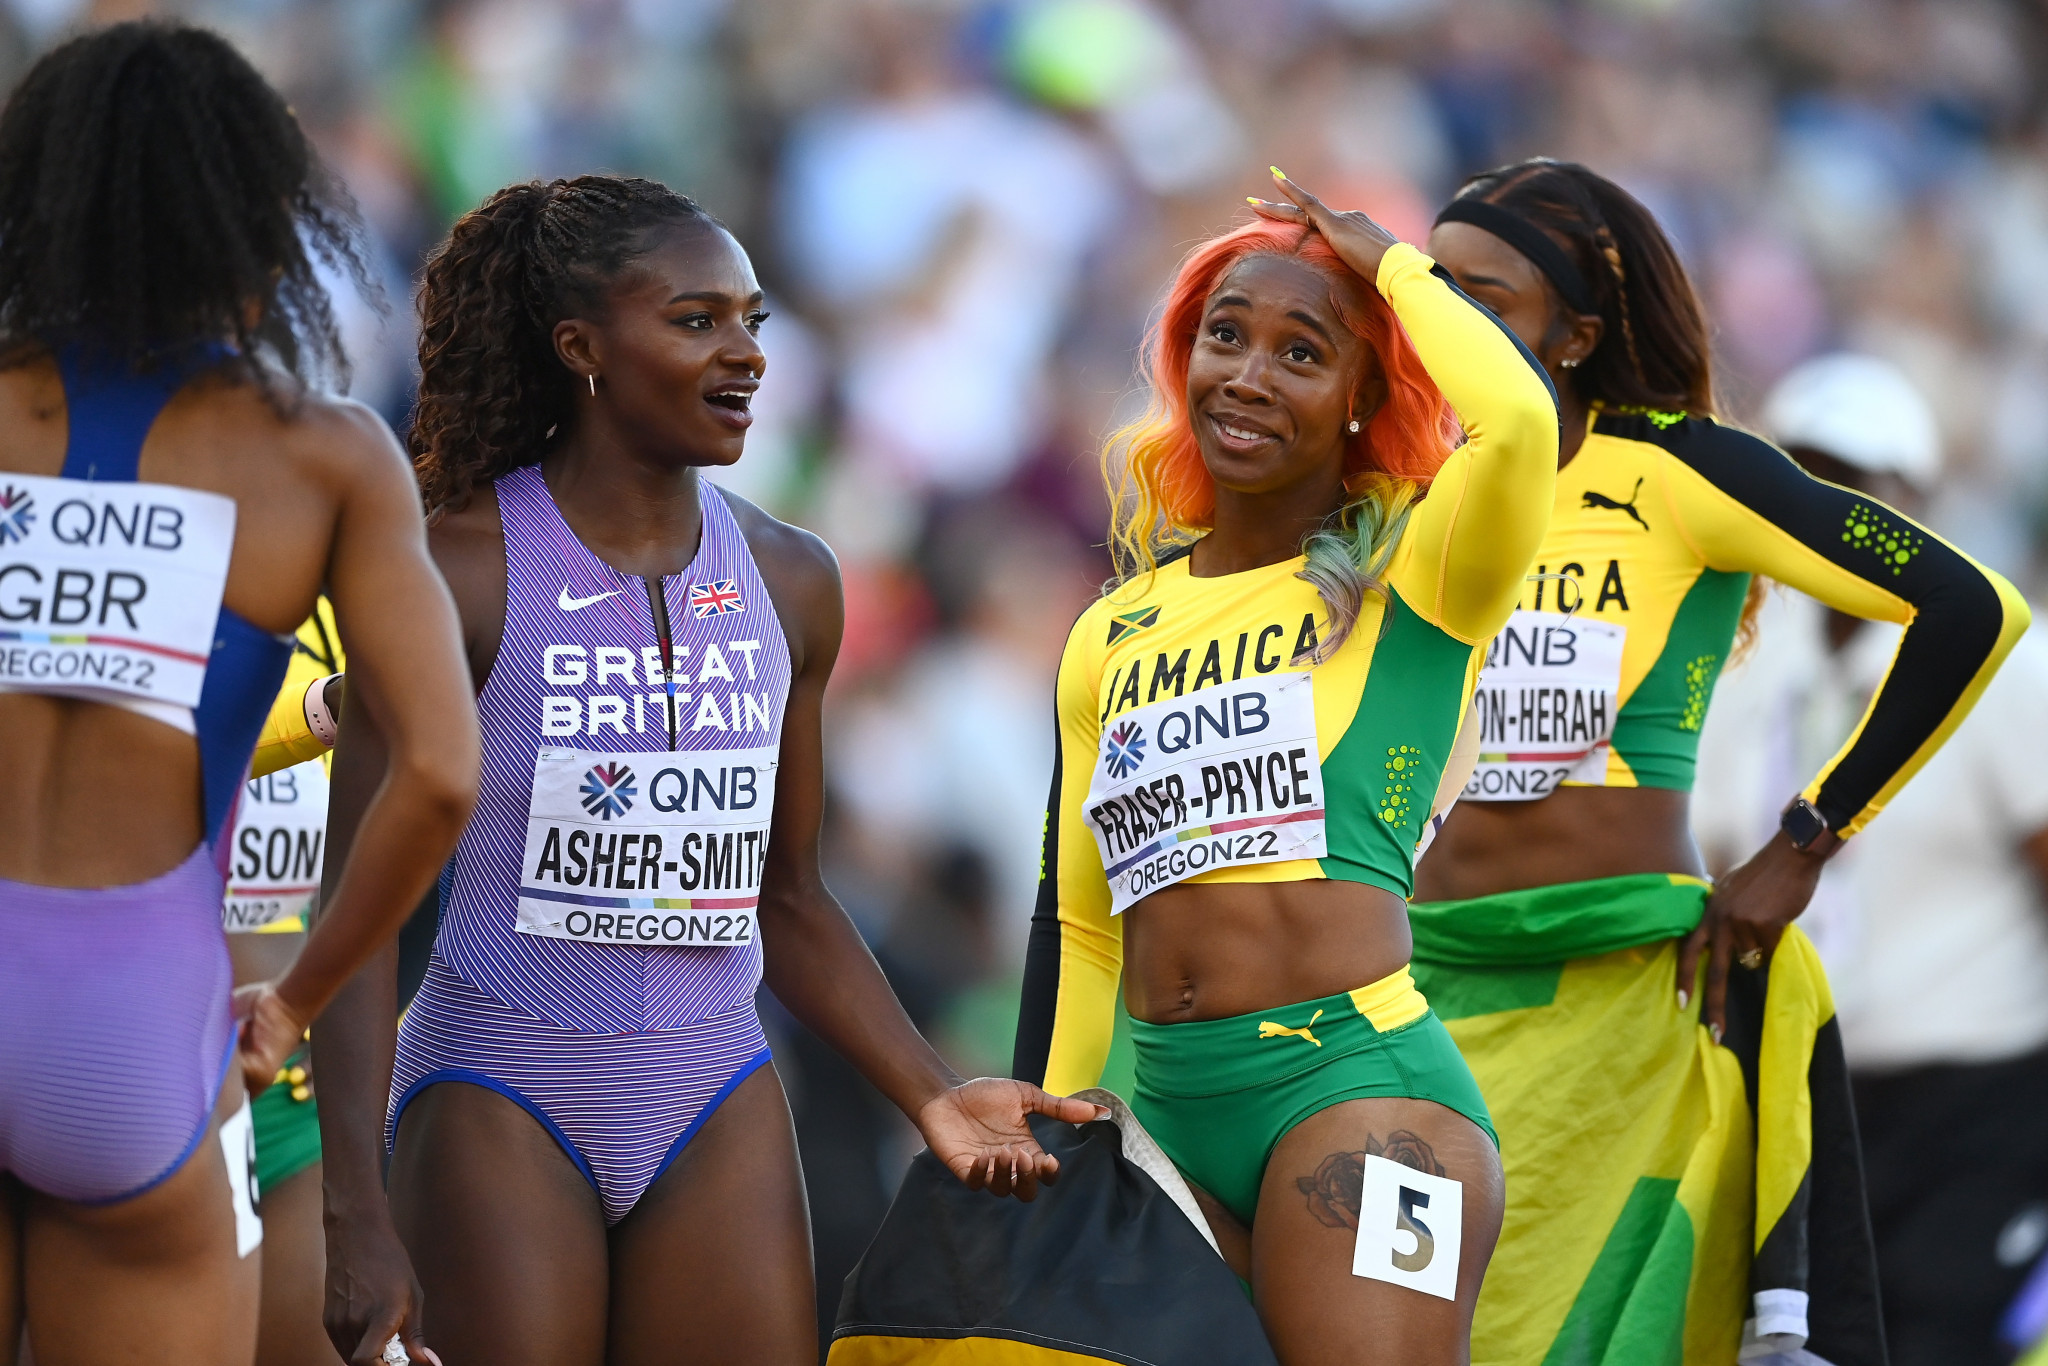 Asher-Smith a doubt for Birmingham 2022 after World Championships injury scare